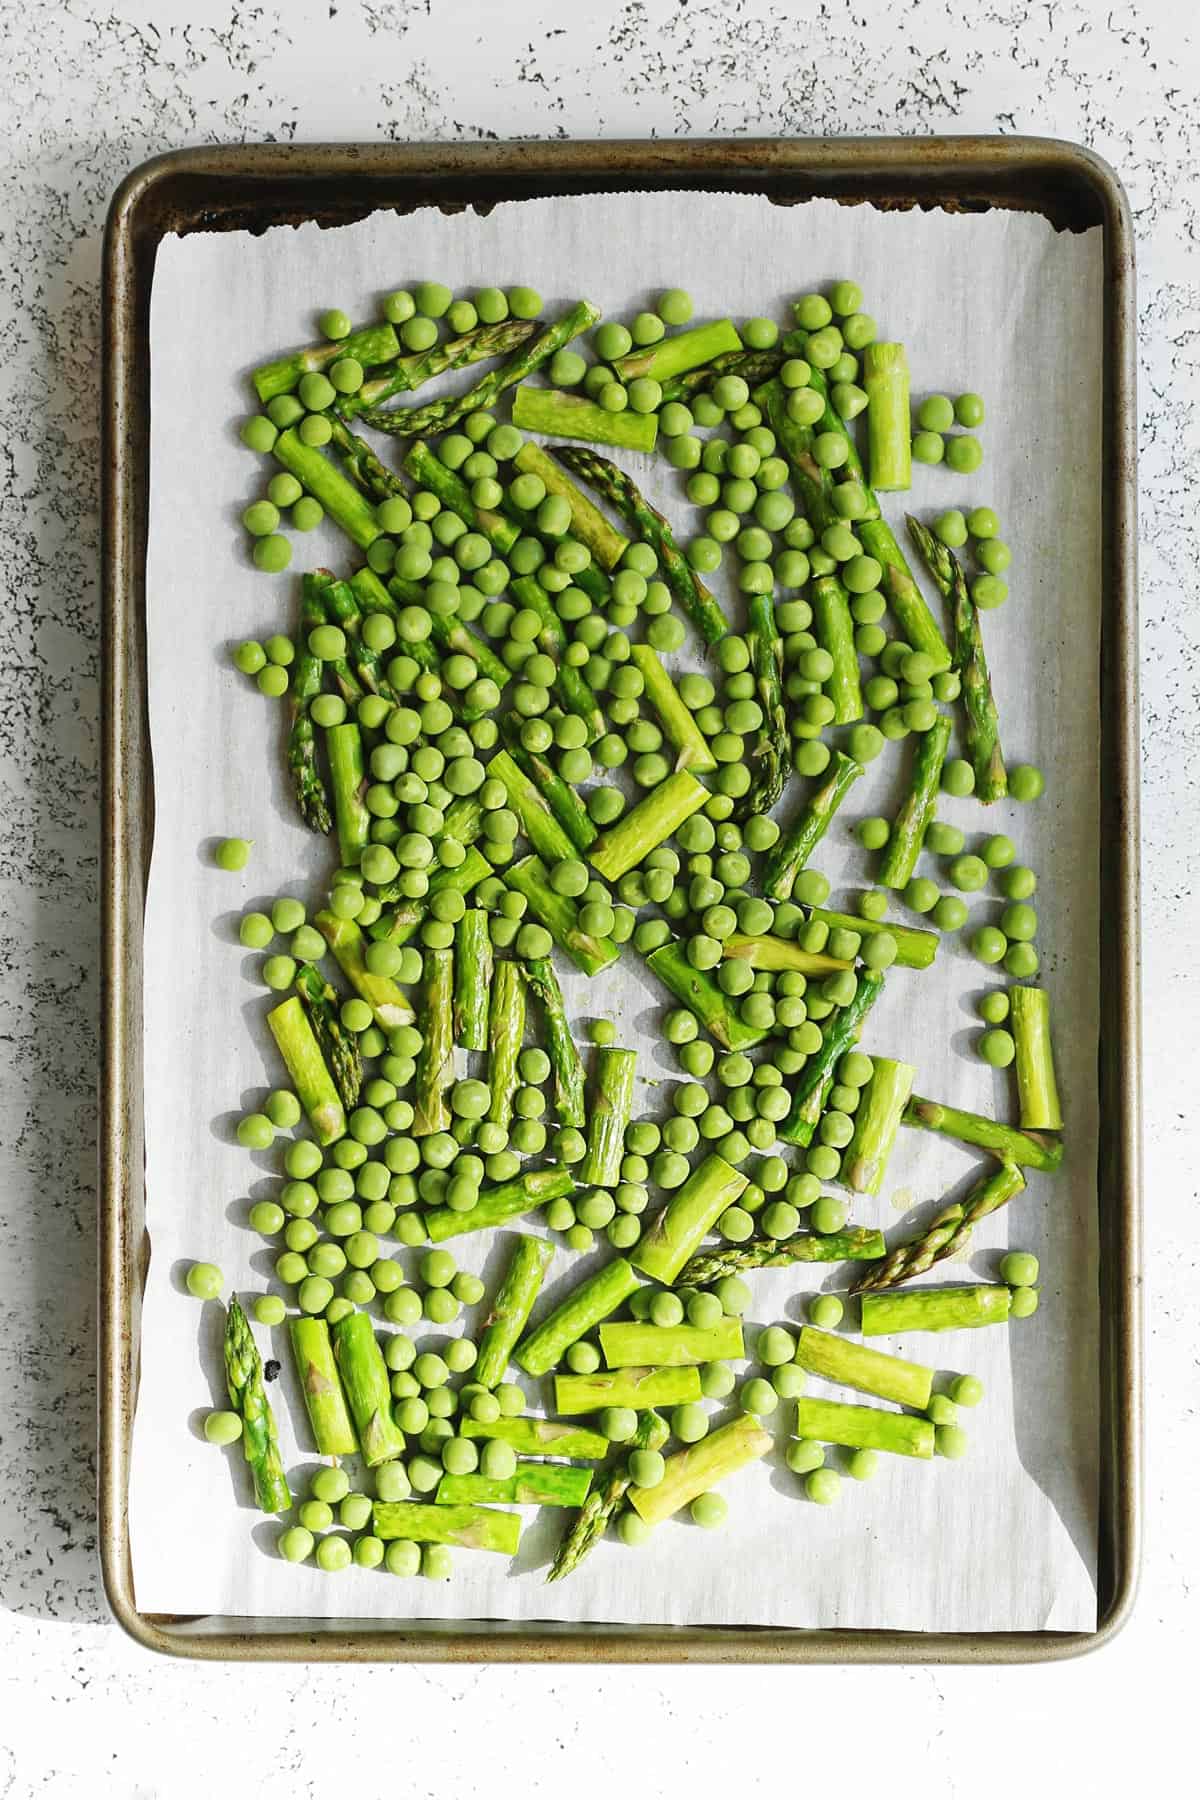 Roasted asparagus and peas on a sheet pan